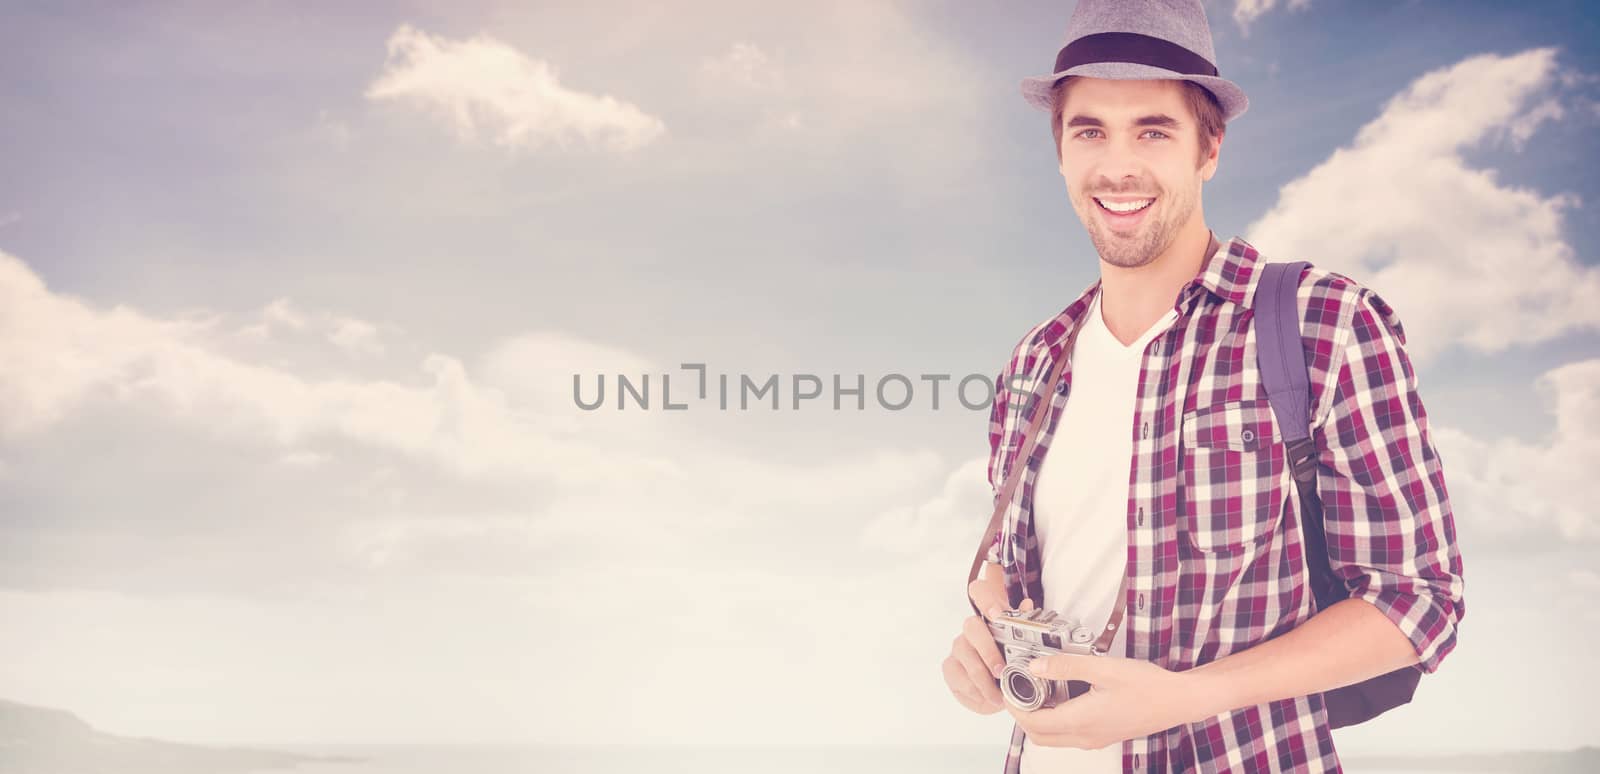 Composite image of portrait of man smiling while holding camera by Wavebreakmedia